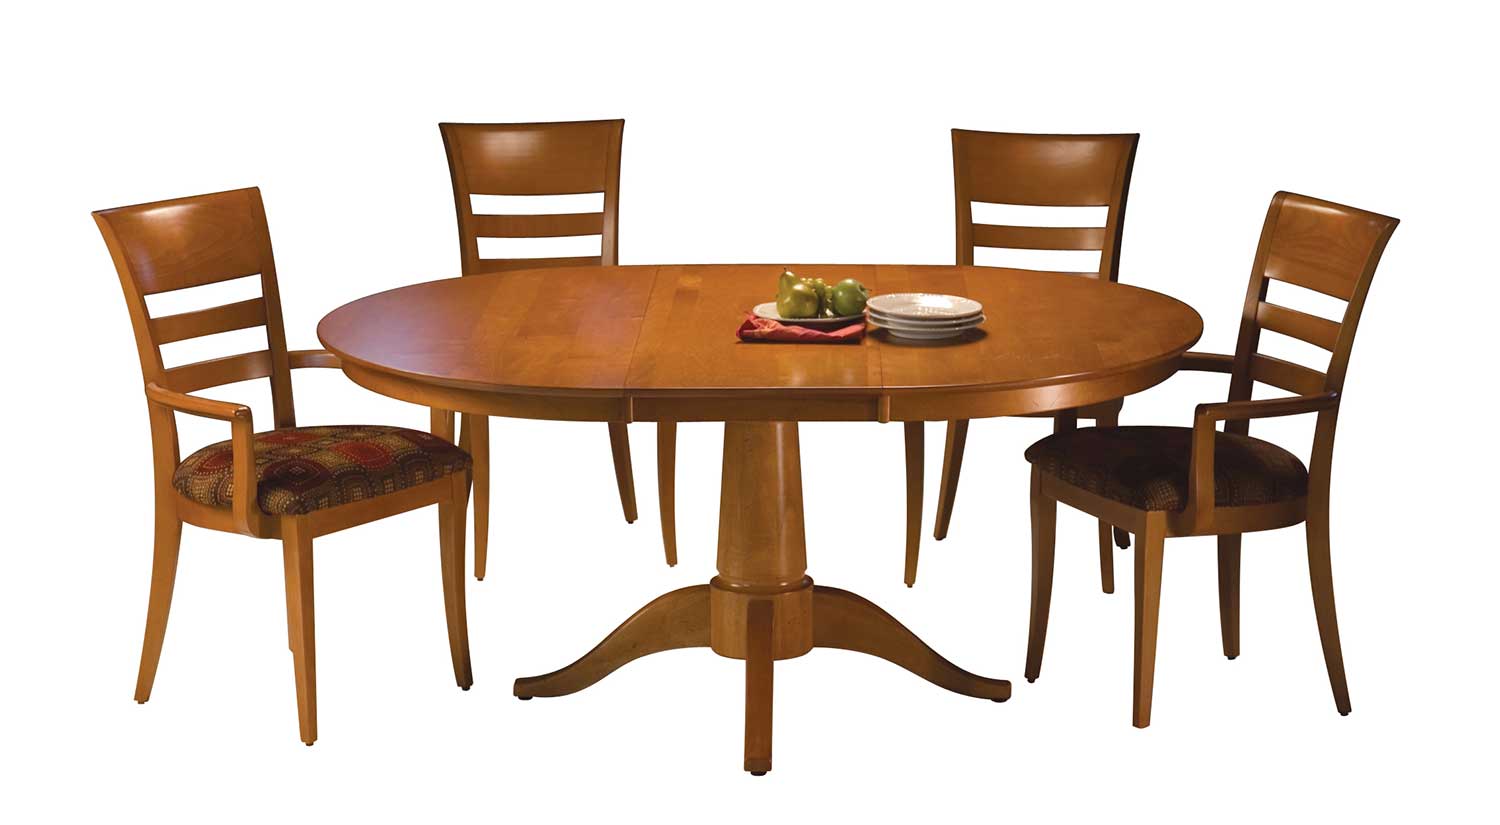 wooden dining room table and chair set by Saloom